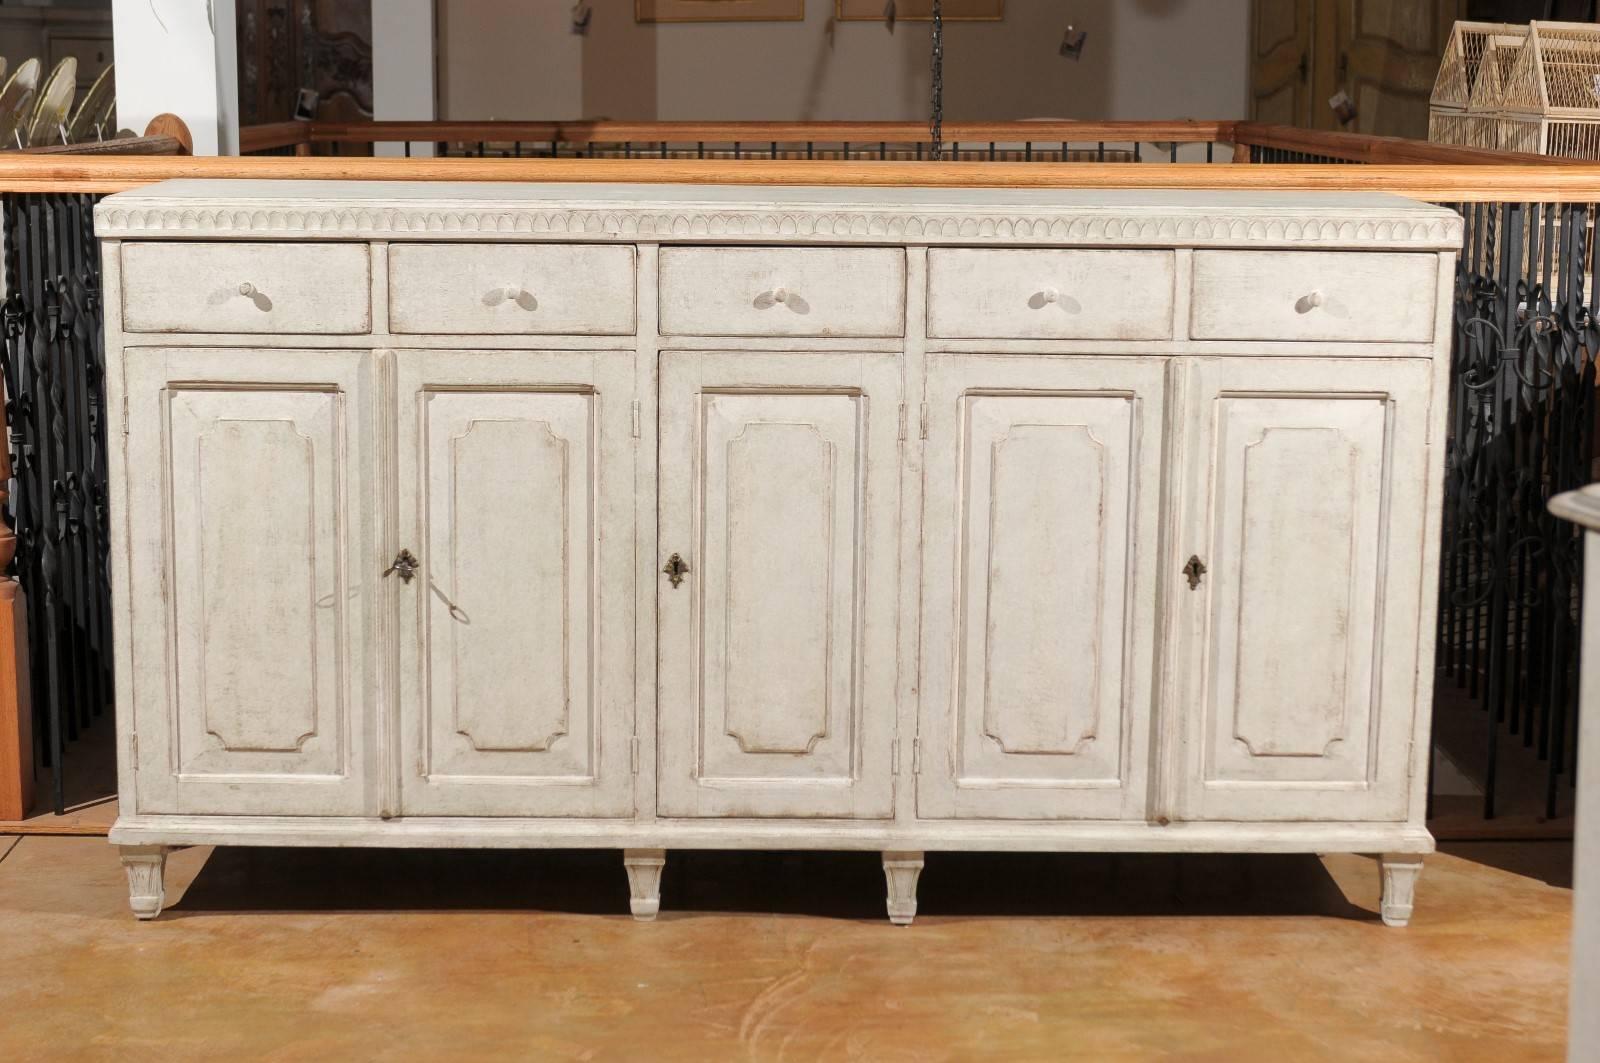 A Swedish painted wood five-door and five-drawer enfilade from the late 19th century. This Swedish long buffet features a rectangular top adorned with a carved molding on three sides. The motifs evoke the simplicity of broken arches of an early